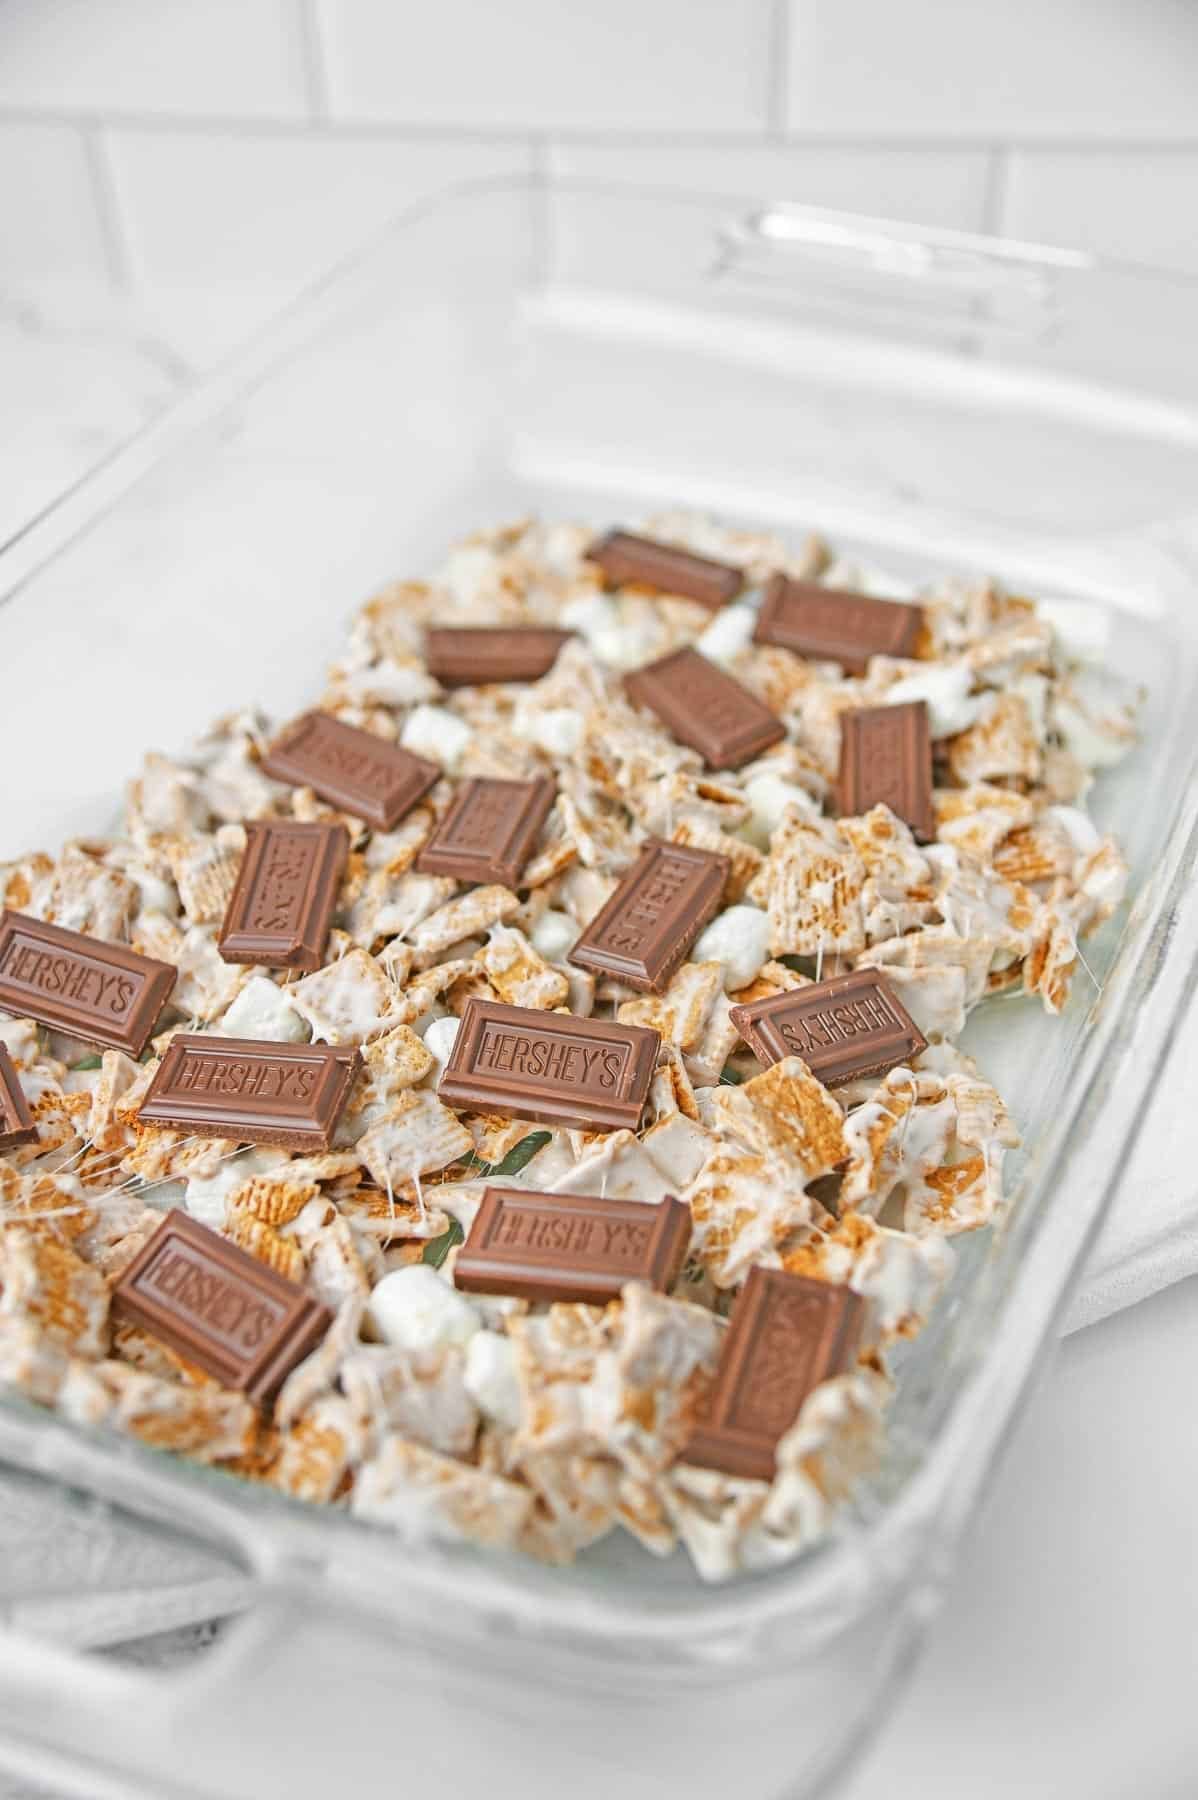 The cereal marshmallow mixture pressed evenly to the bottom of the glass baking dish with chocolate bar pieces laid over.